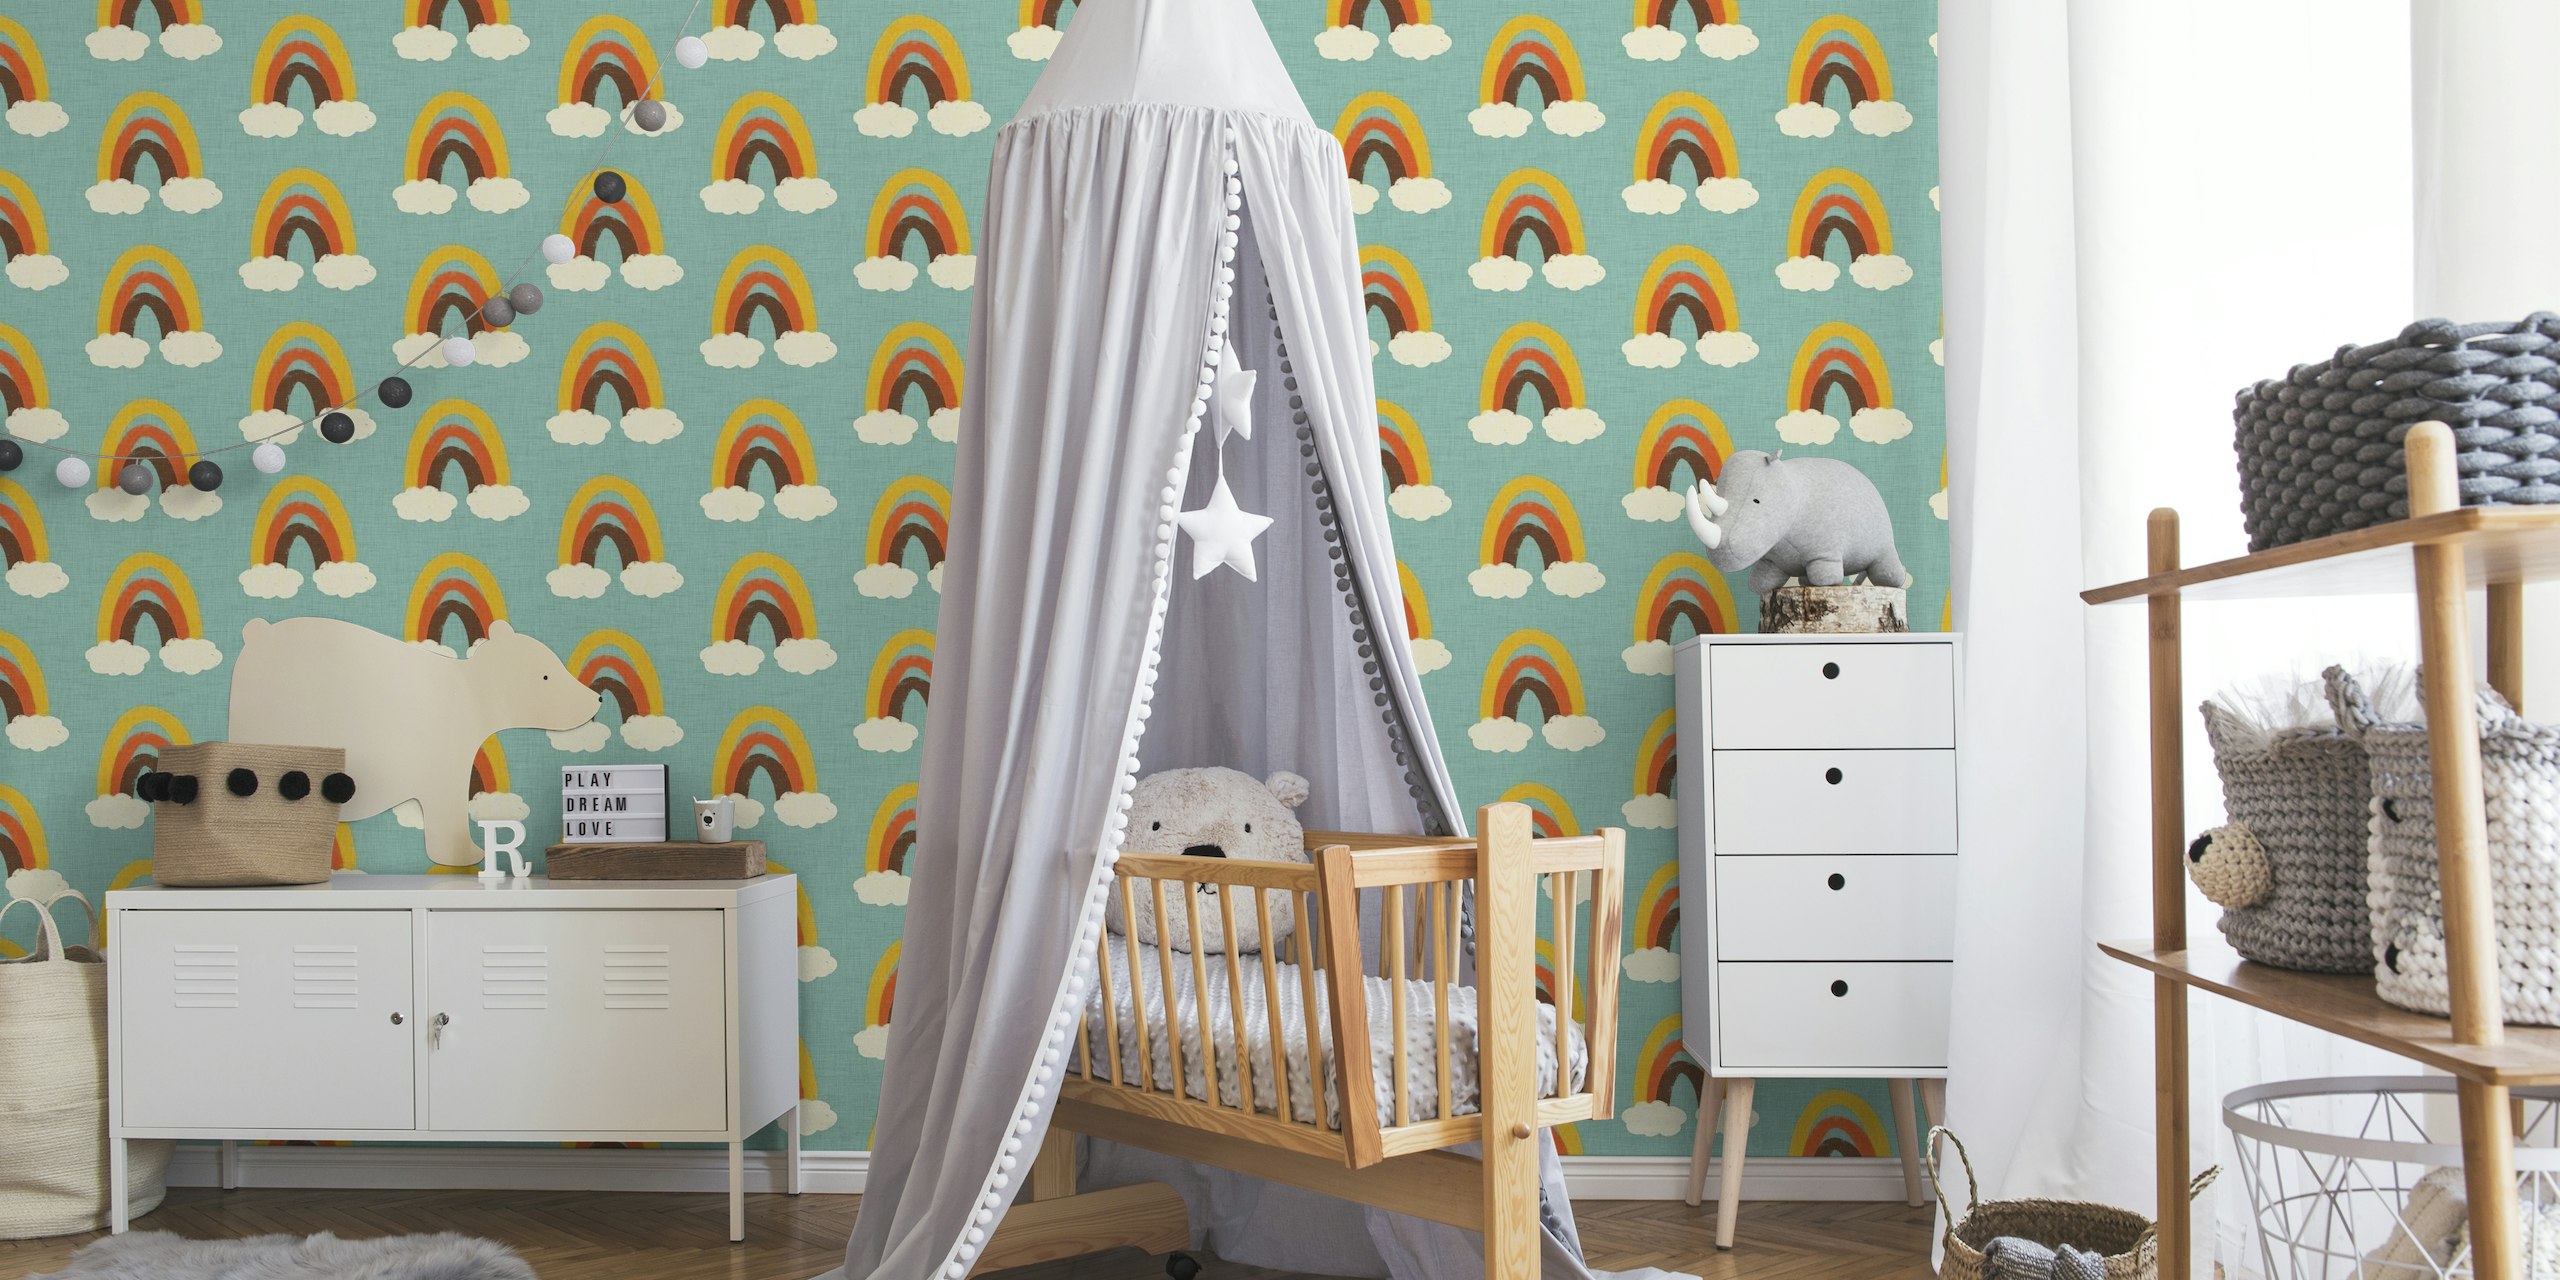 Groovy 70s Cute Rainbow with clouds Blue papel pintado